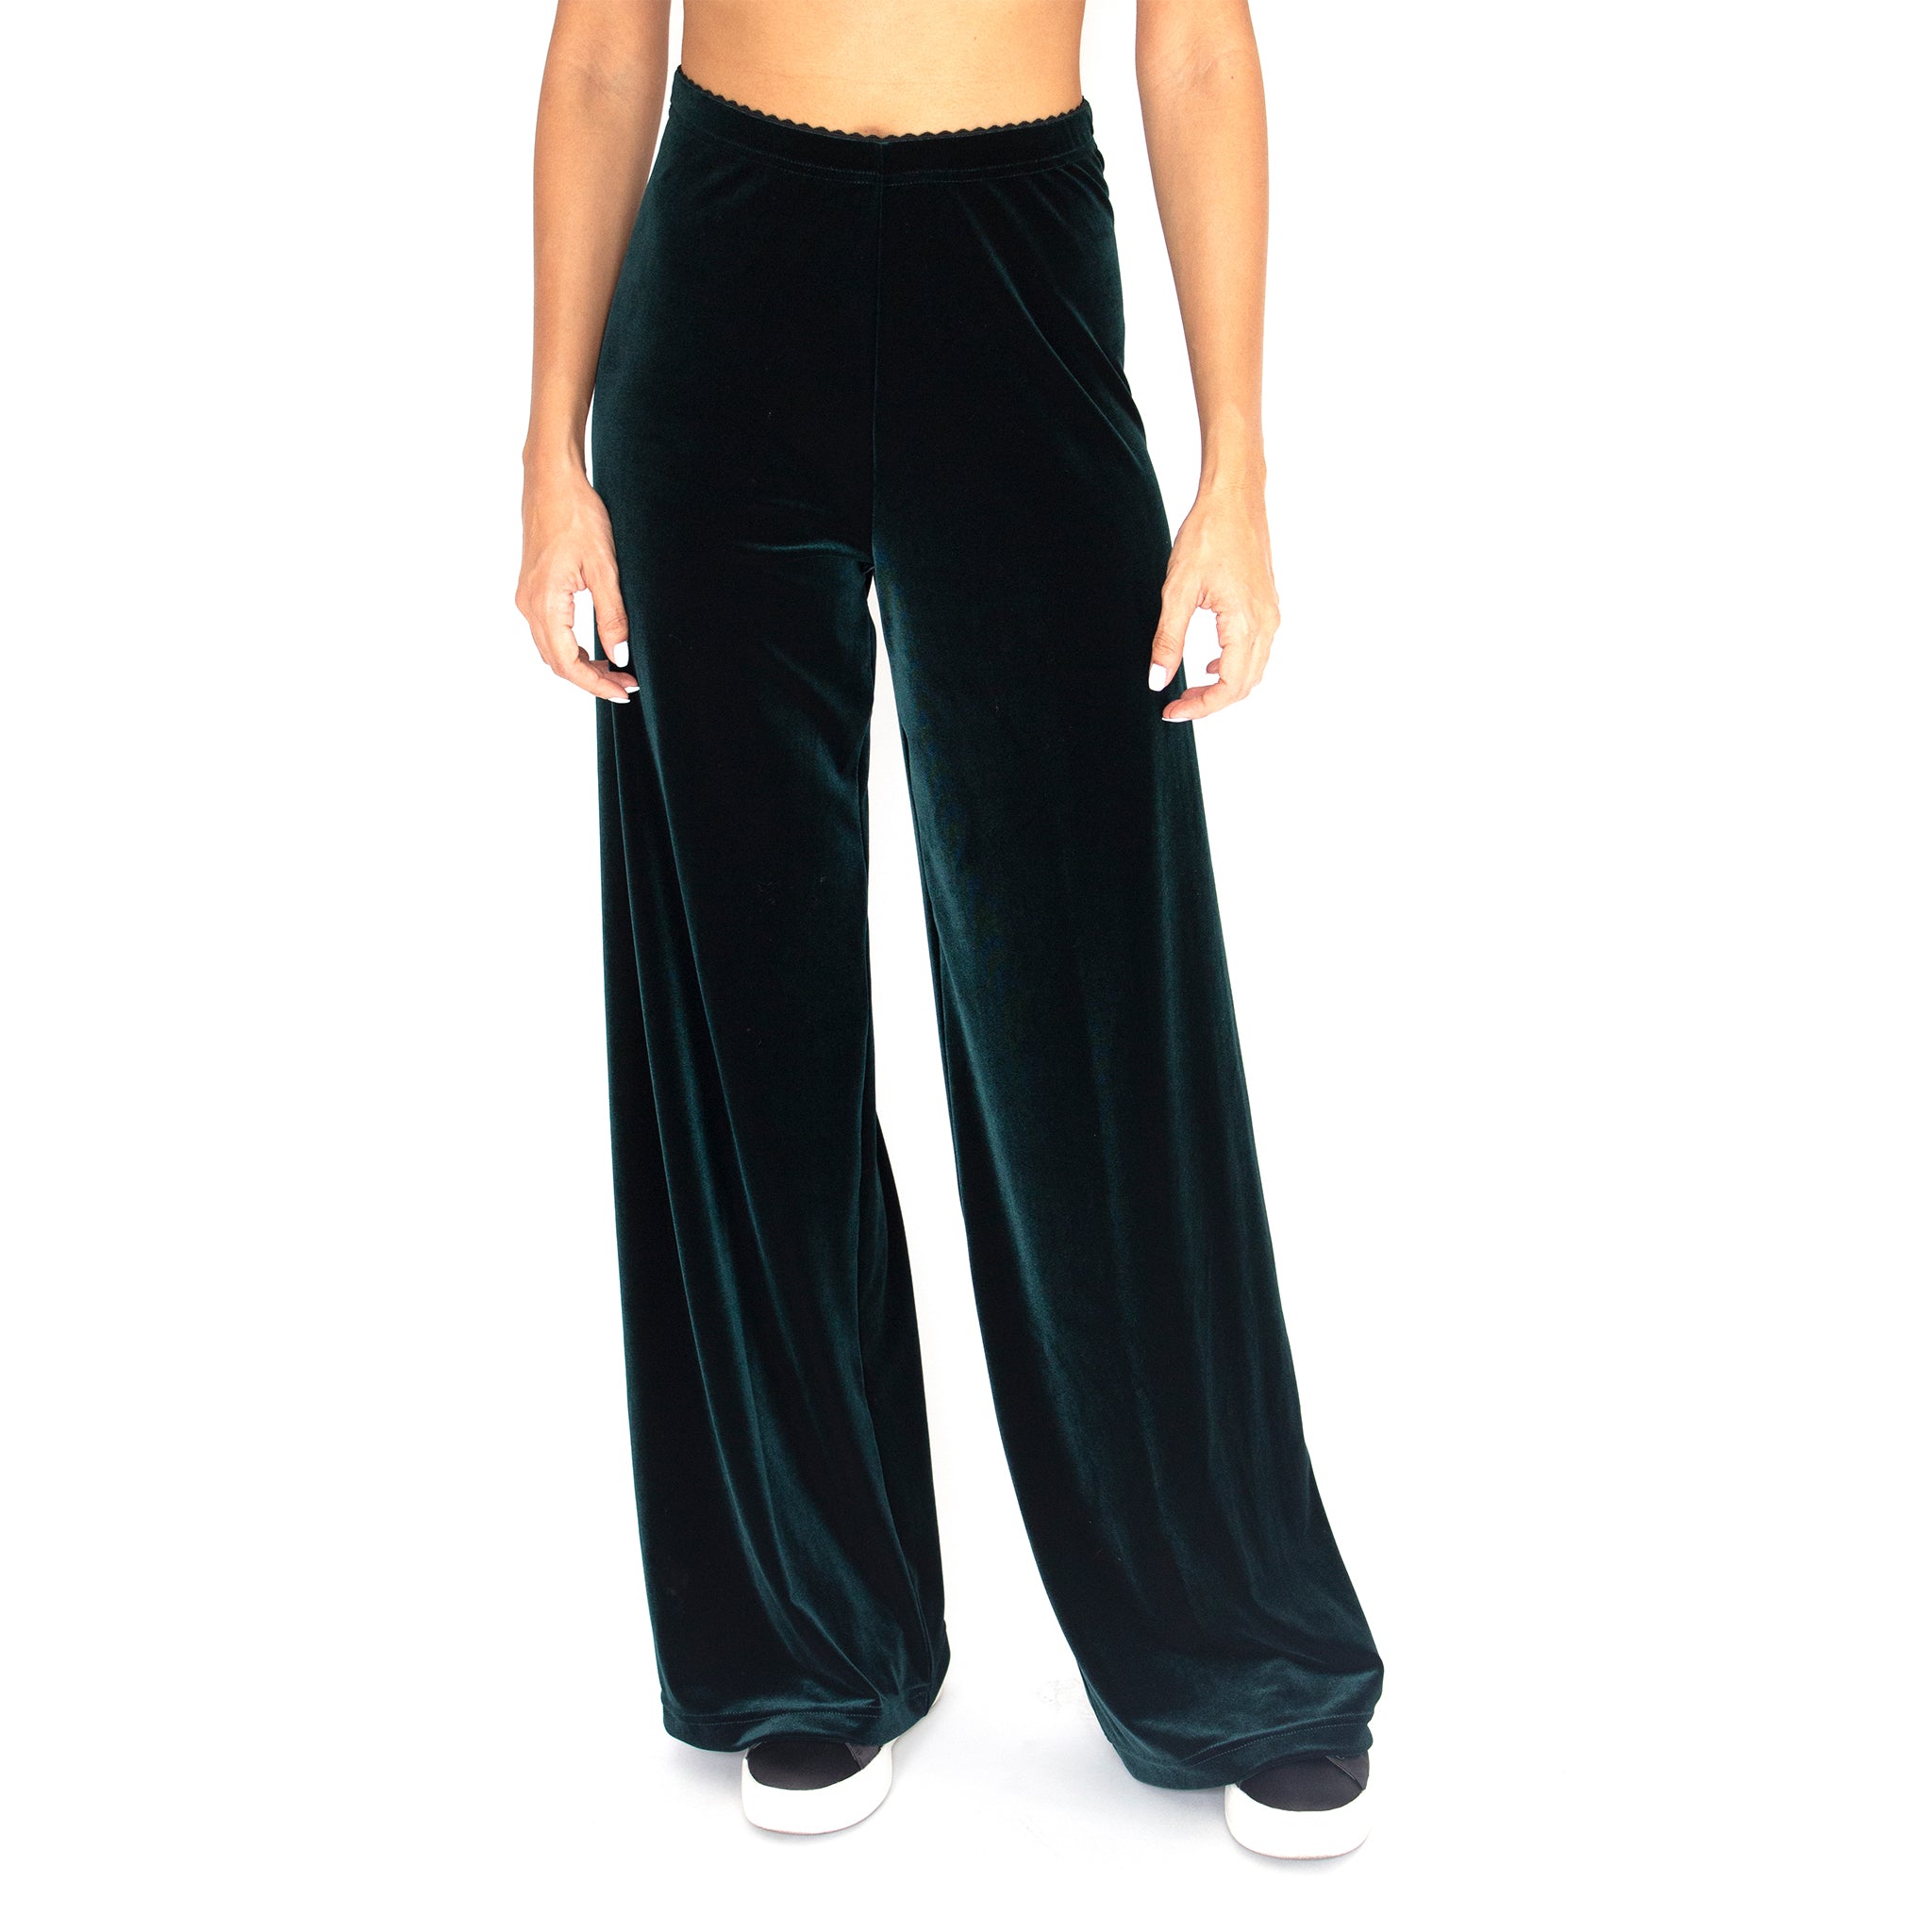 Front view of our Stretch Velvet Track Pant in Hunter (Dark Green) with elastic waist and 32" inseam.